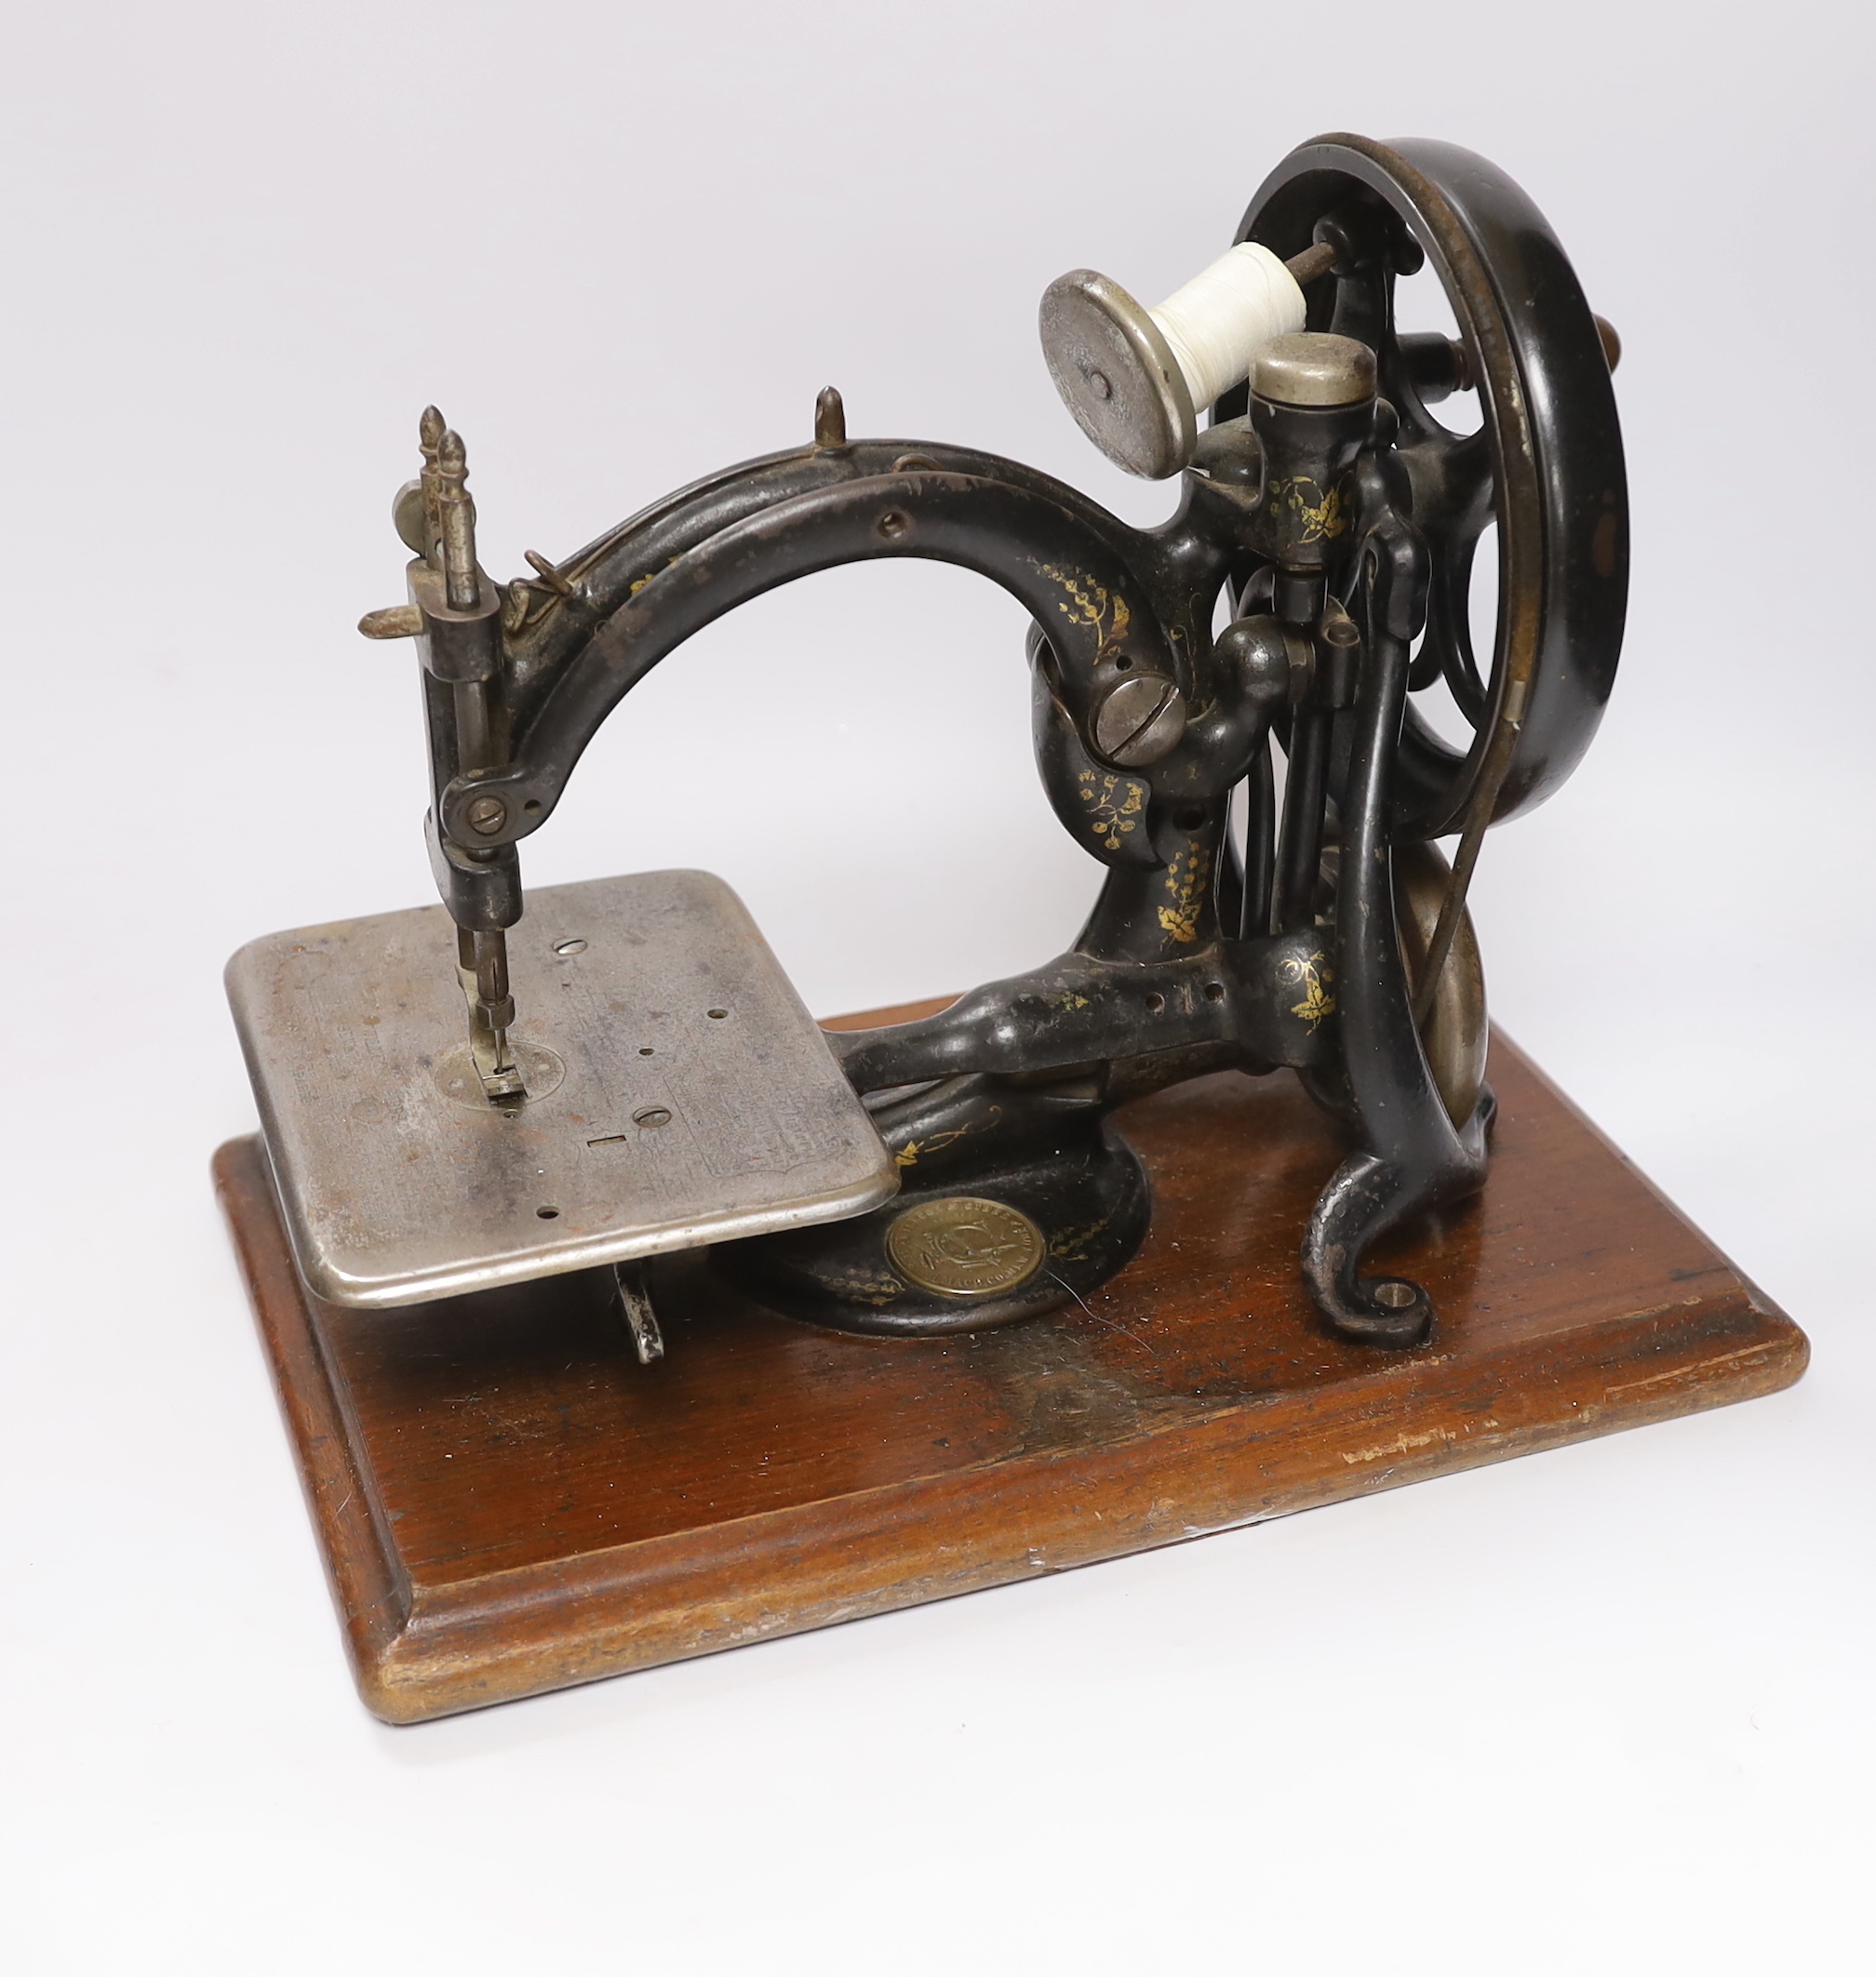 A Victorian Wilcox ad Gibbs sewing machine and a smaller sewing machine, 28cm high